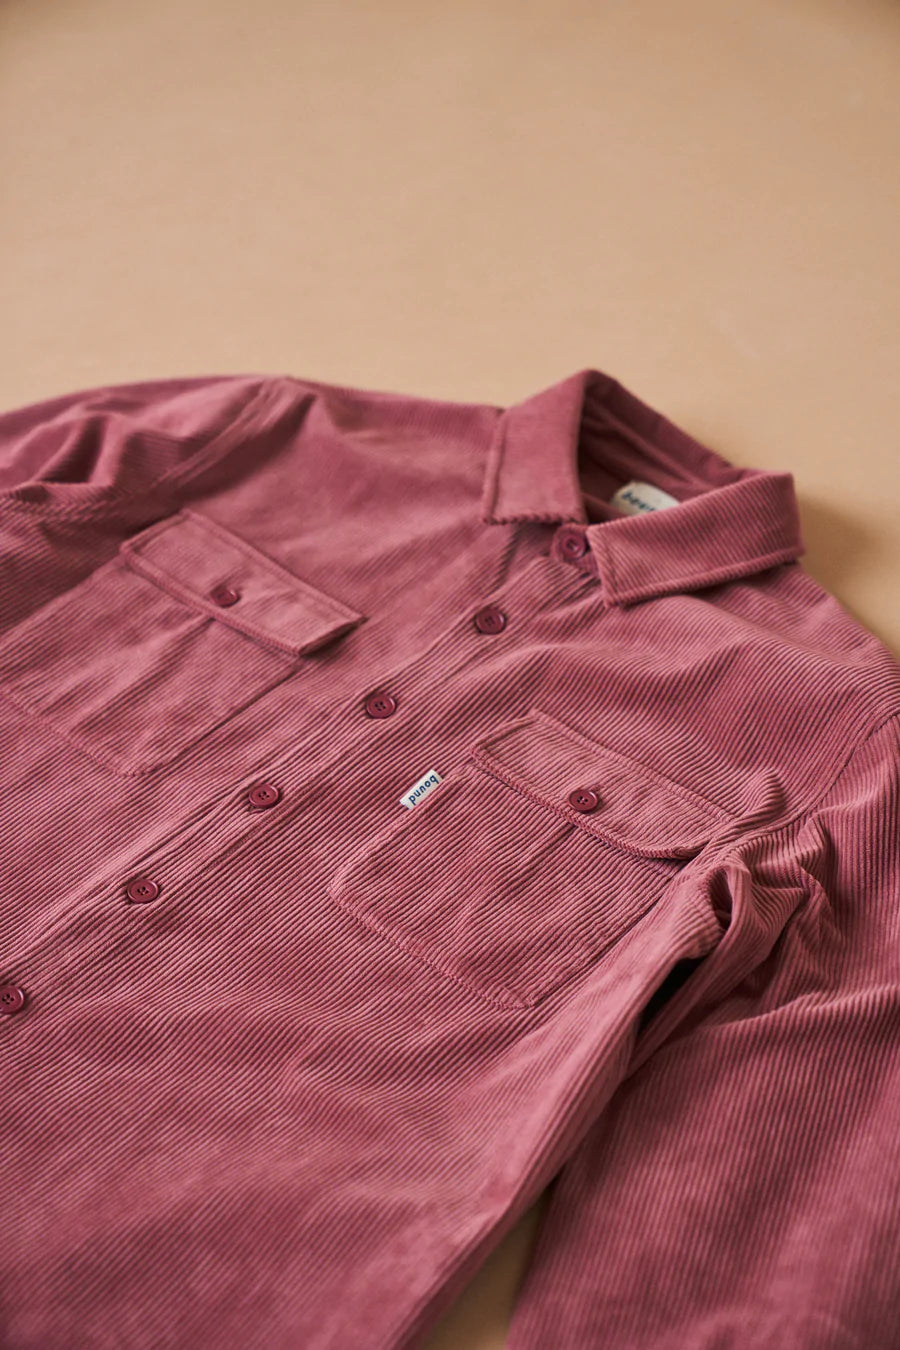 bound 'Rouge' Corduroy Button Up Overshirt